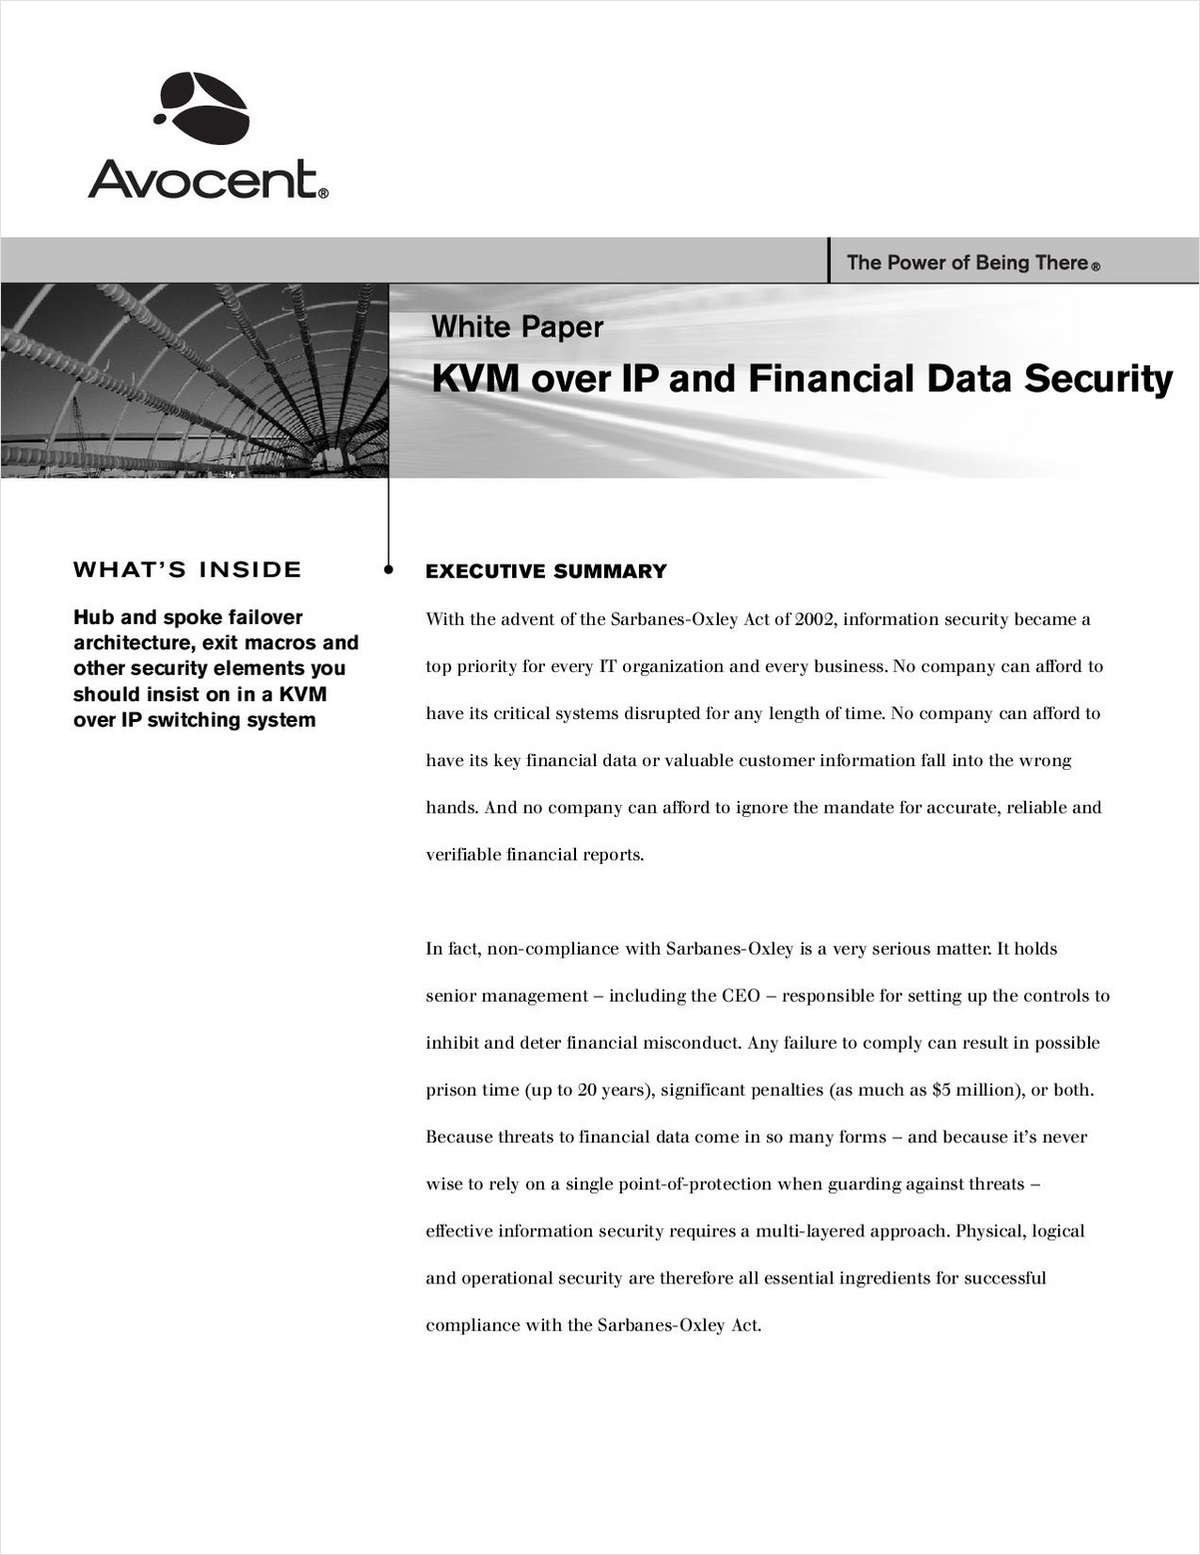 KVM over IP and Financial Data Security